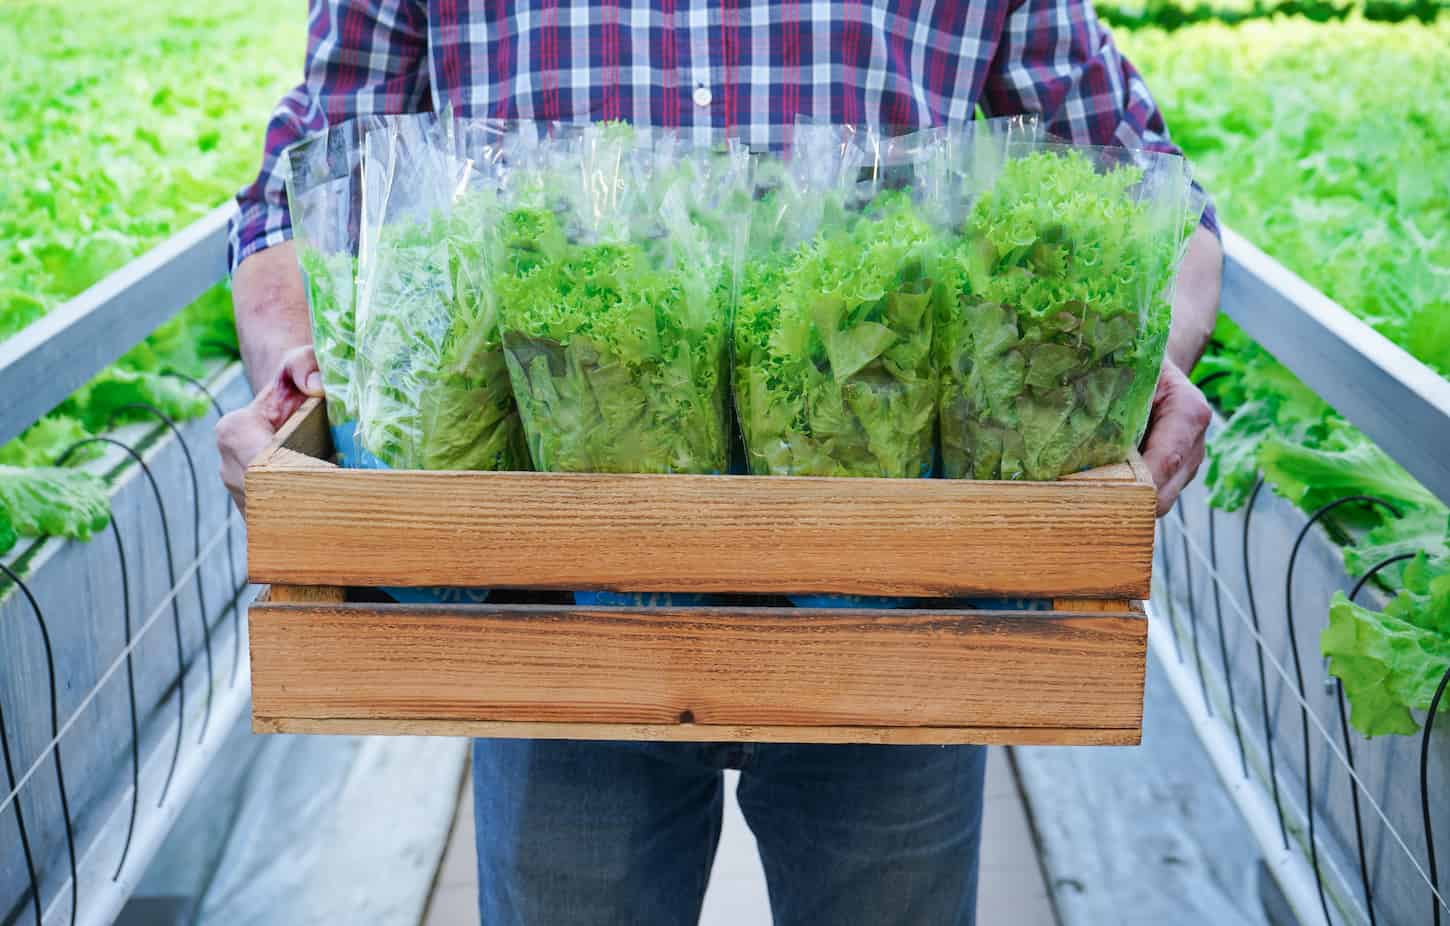 An image of the delivery of fresh herbs and salad from the farm's greenhouse. A man Holds a box of lettuce in his hands.